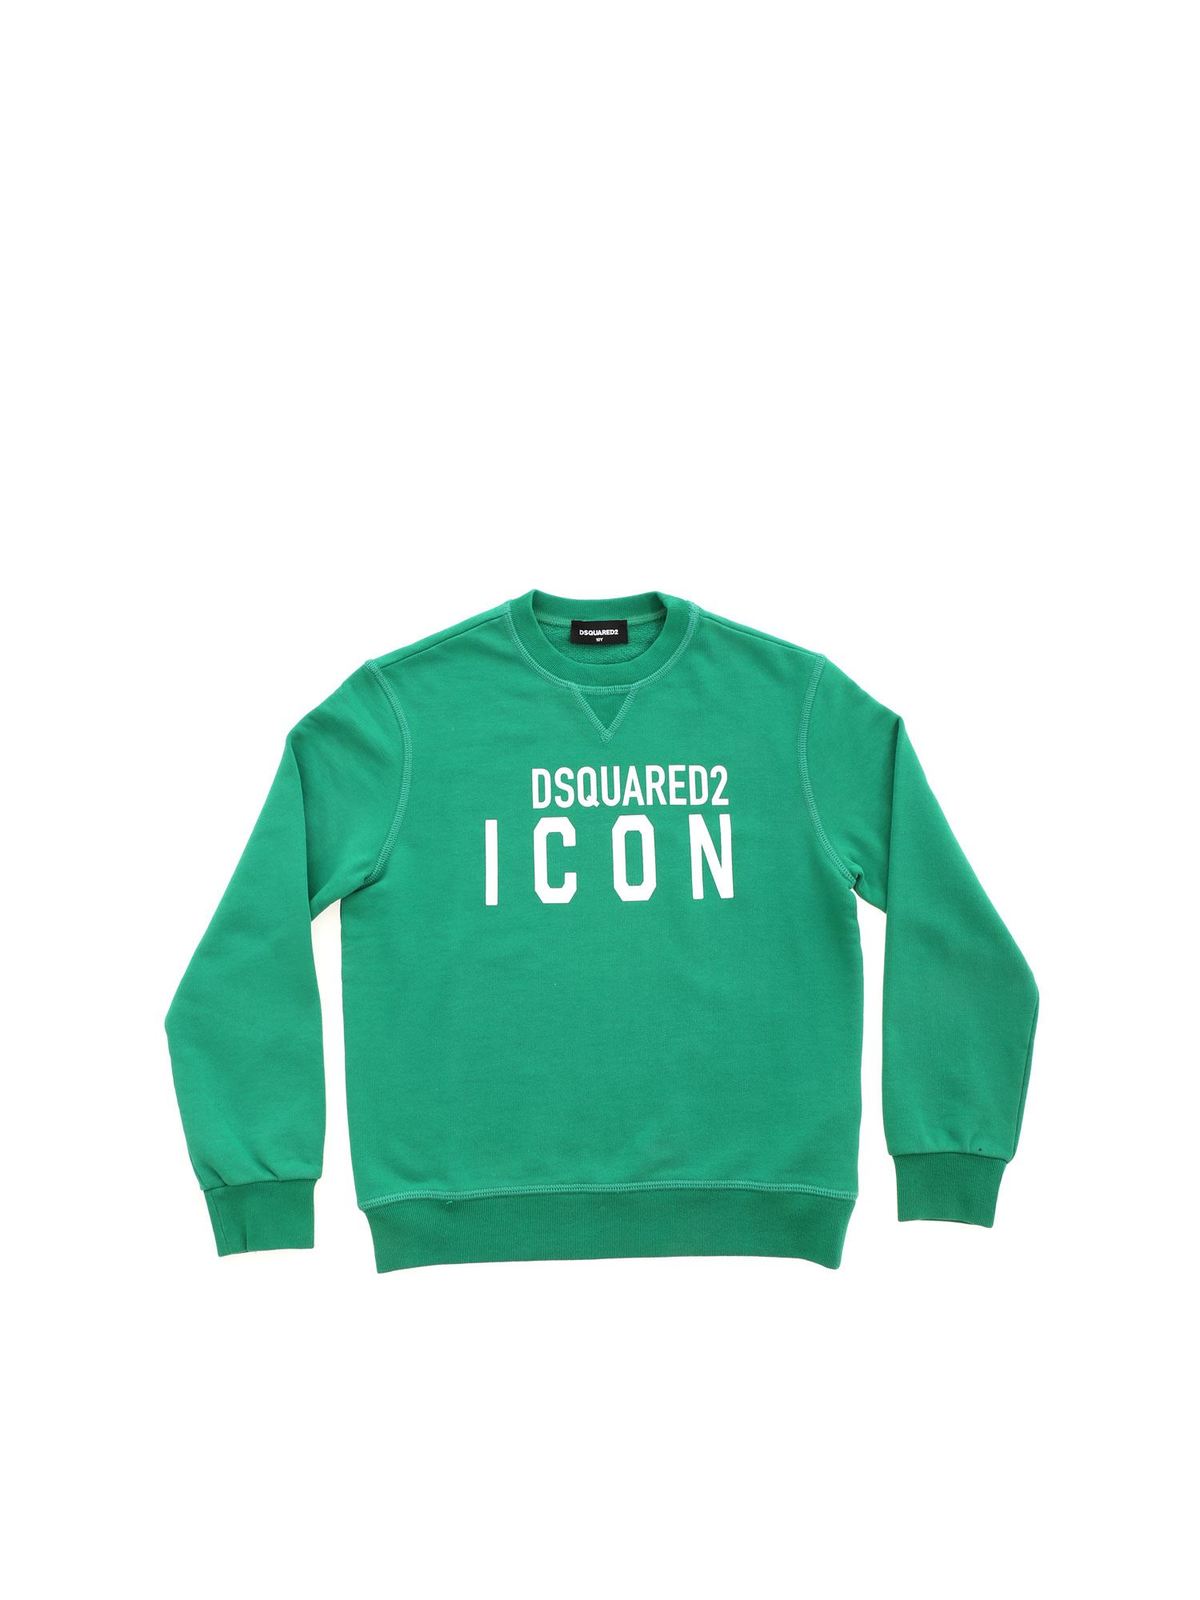 Details about   DSquared2 Logo Printed Green Sweatshirt 